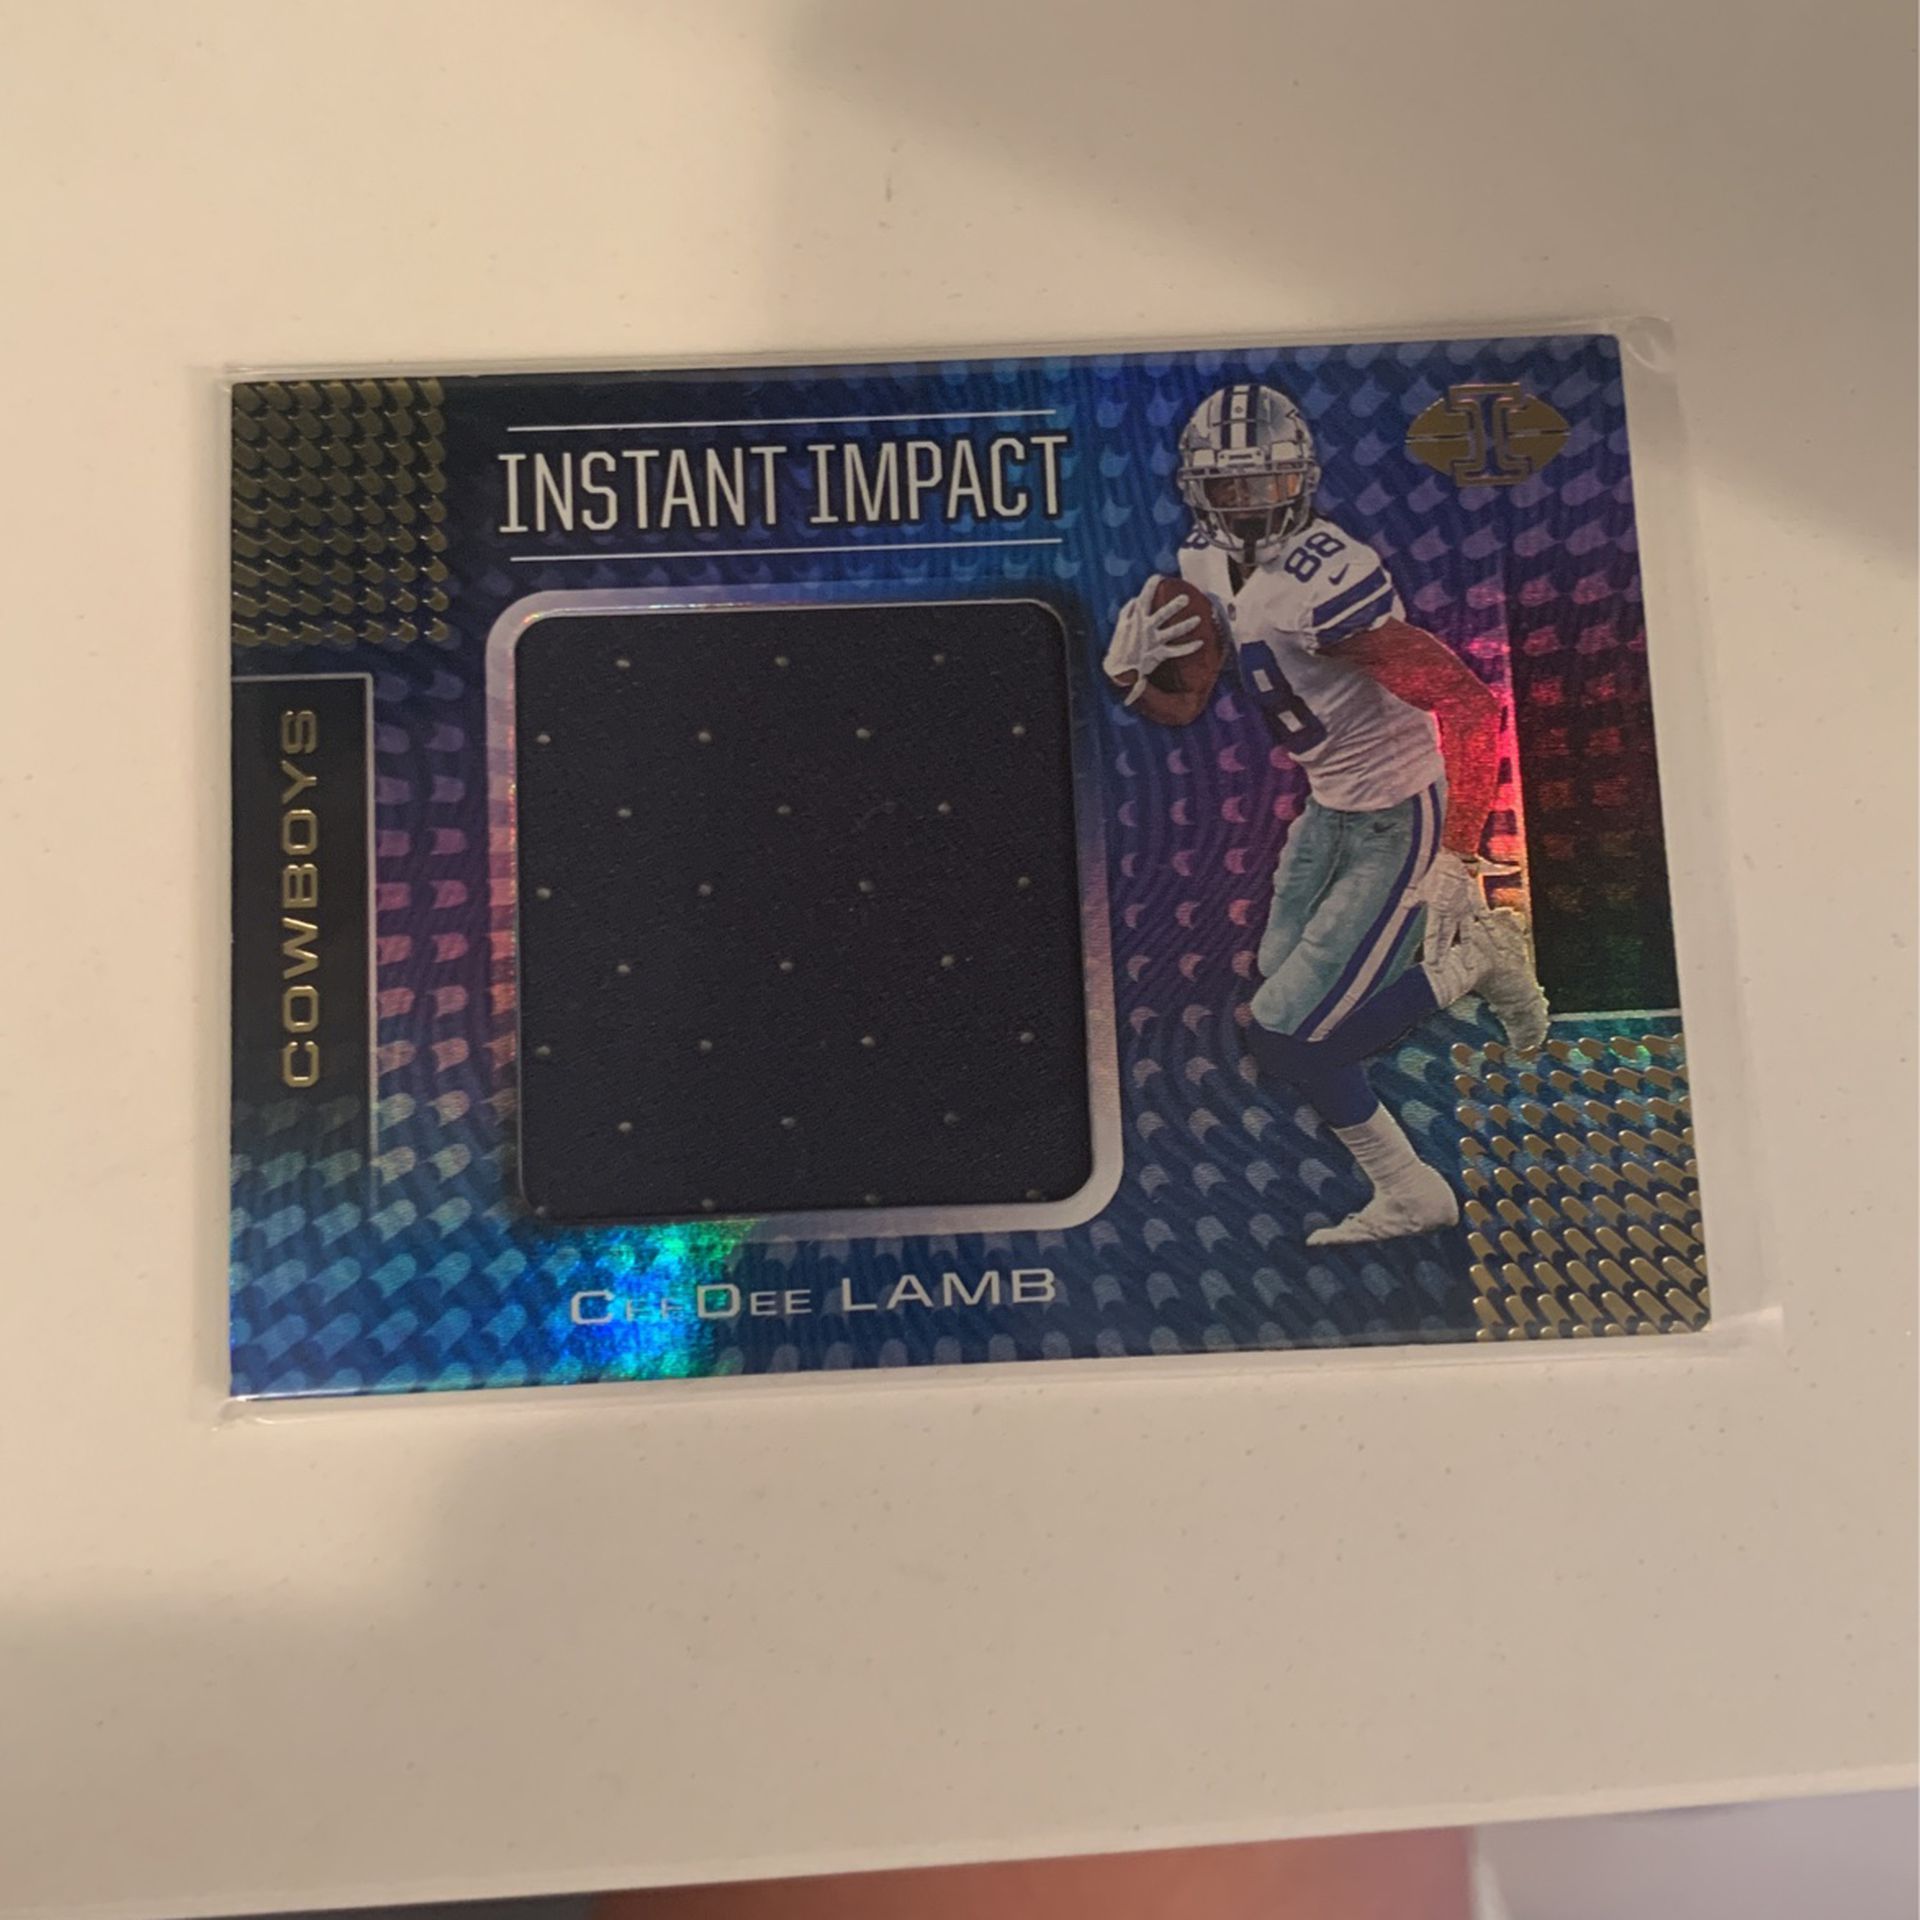 Cee Dee Lamb RC COWBOYS JERSEY PATCH ILLUSIONS 